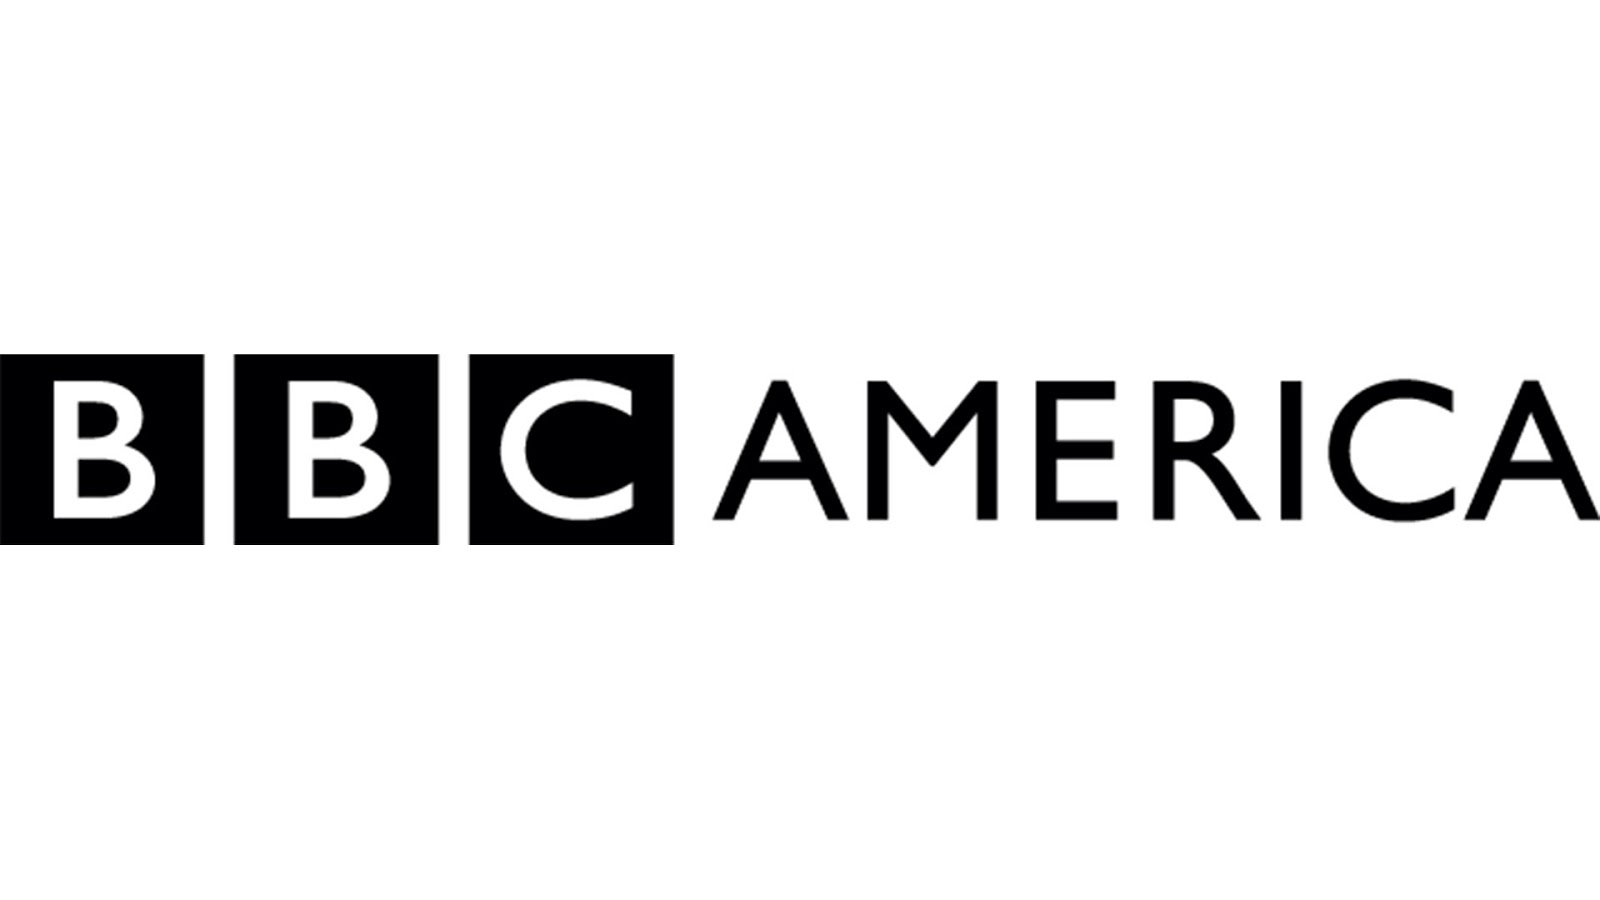 Prey - Thriller Starring John Simm, Philip Glenister and Rosie Cavaliero Picked Up by BBC America